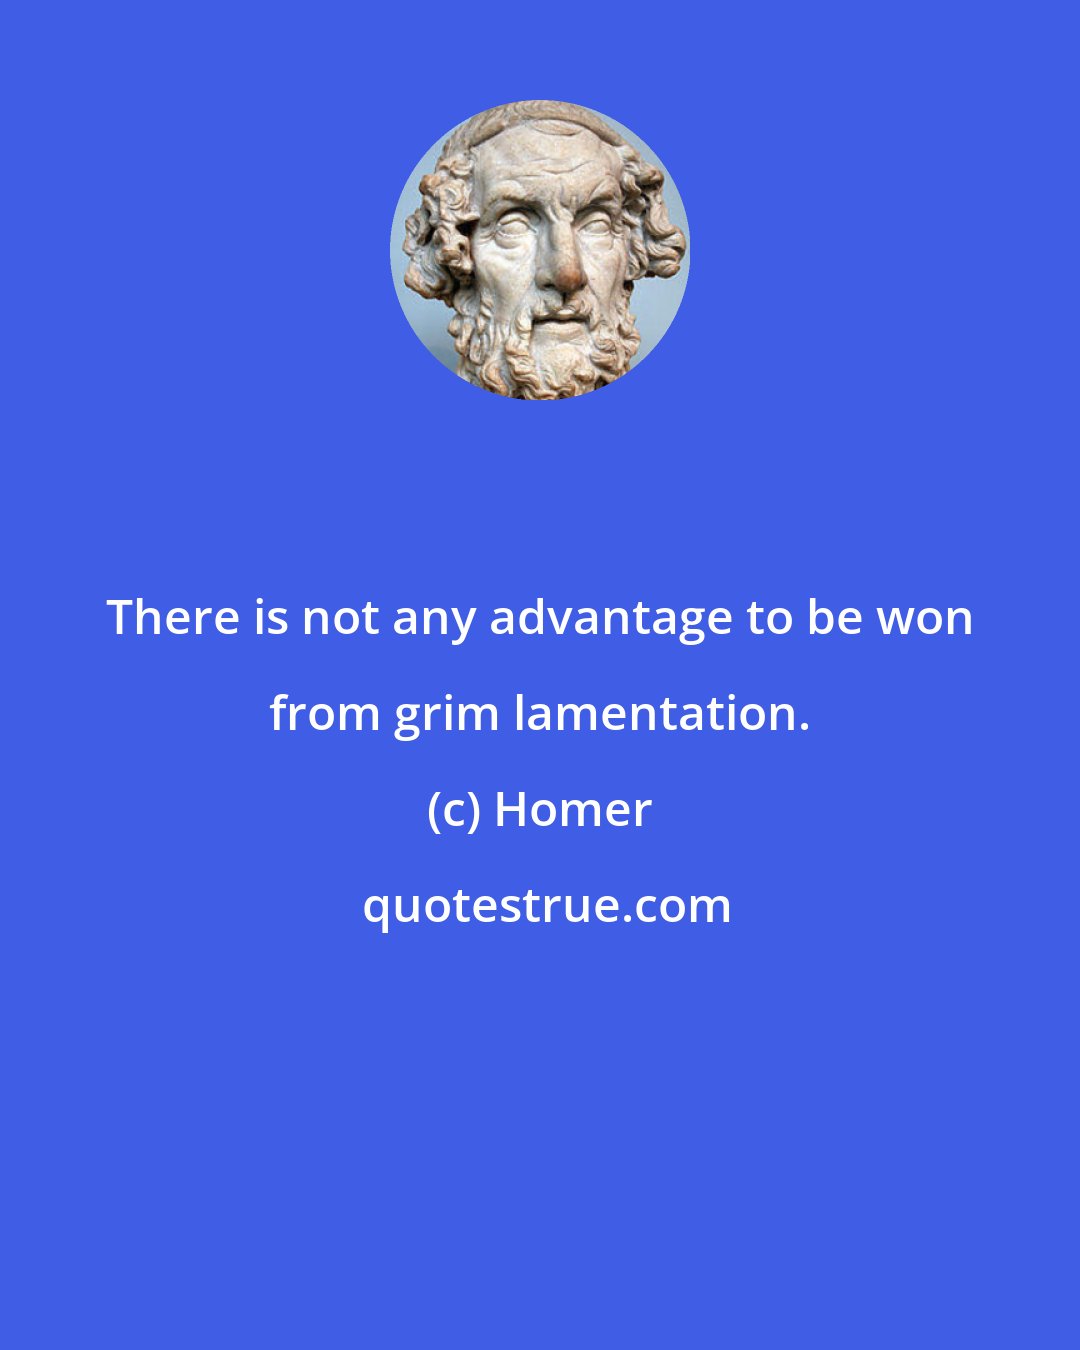 Homer: There is not any advantage to be won from grim lamentation.